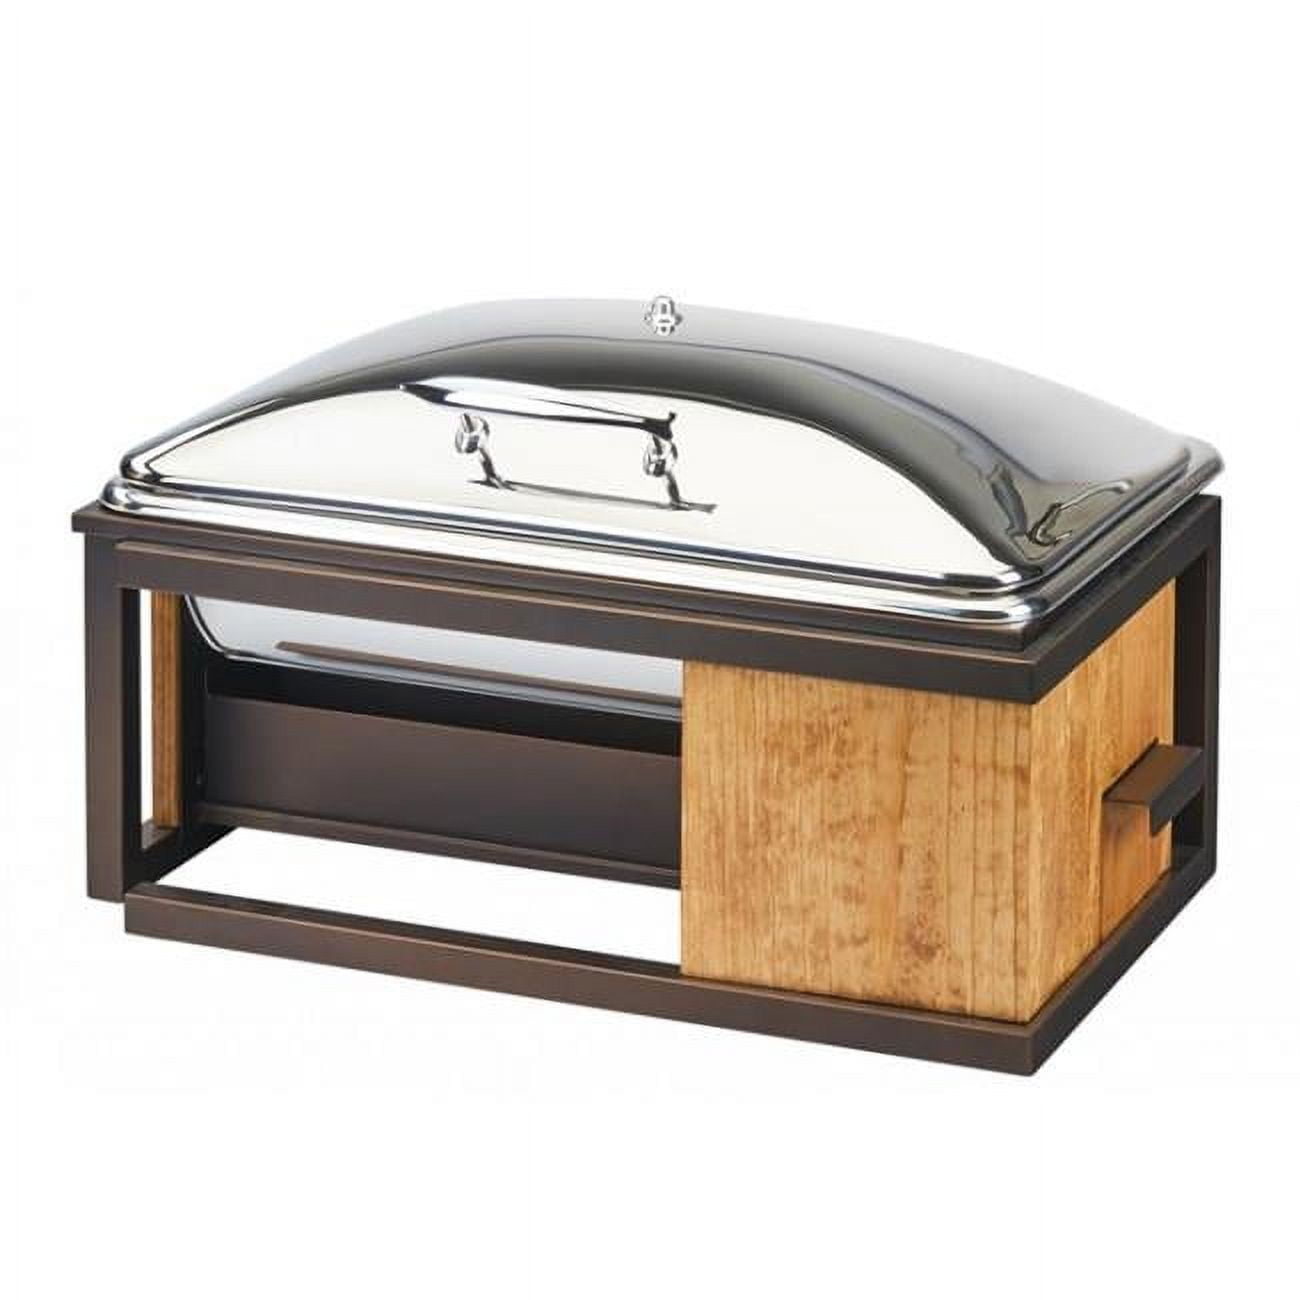 3907-84 Sierra Bronze Metal & Reclaimed Wood Full Size Chafer With Lid - 22 X 15 X 14 In.